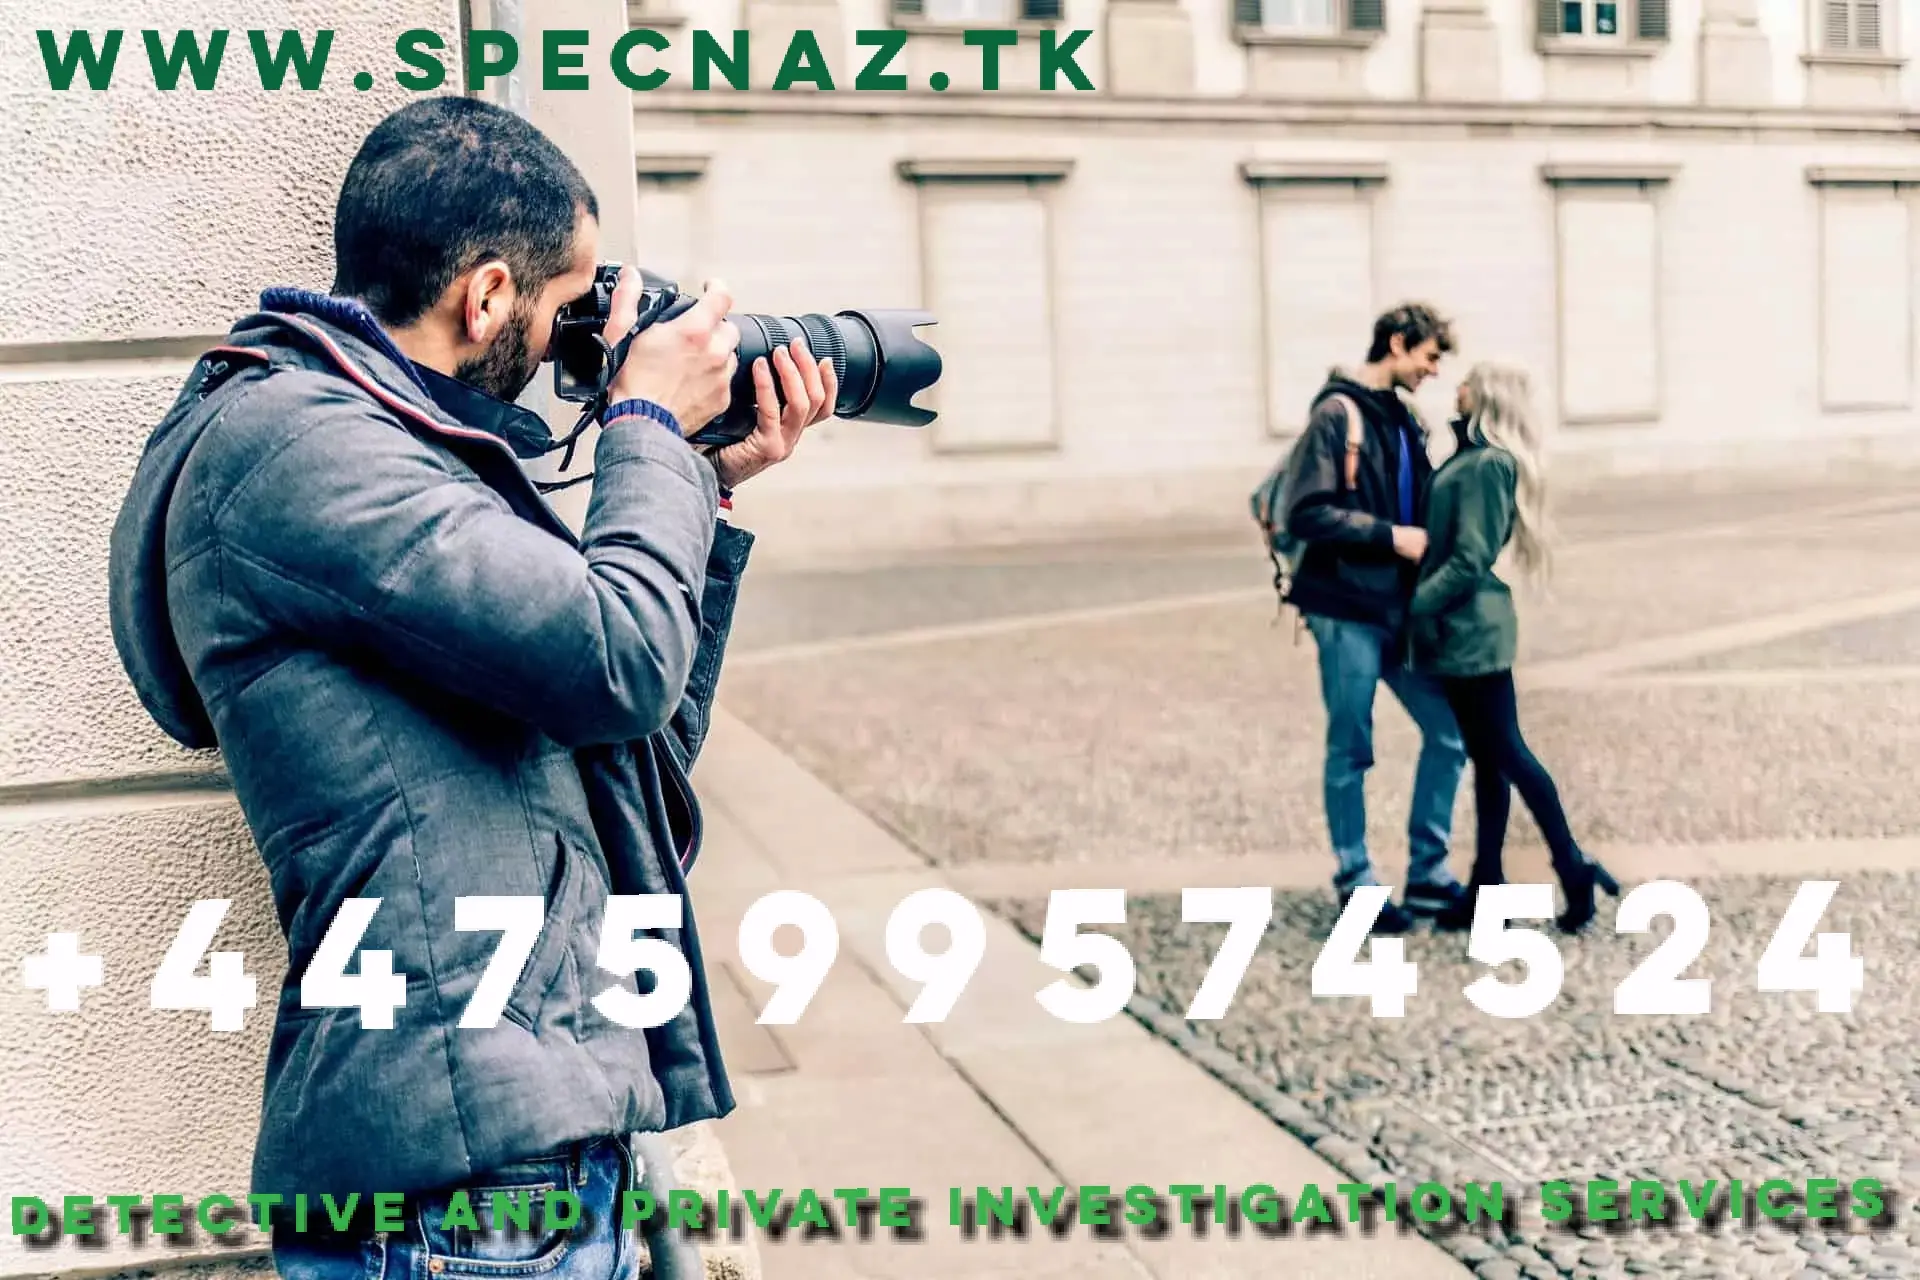  Trustworthy Private Investigator Services:| Costs/ Fees. | Discreet, reliable and affordable Private Detective London | Hire Detective Agency Services UK